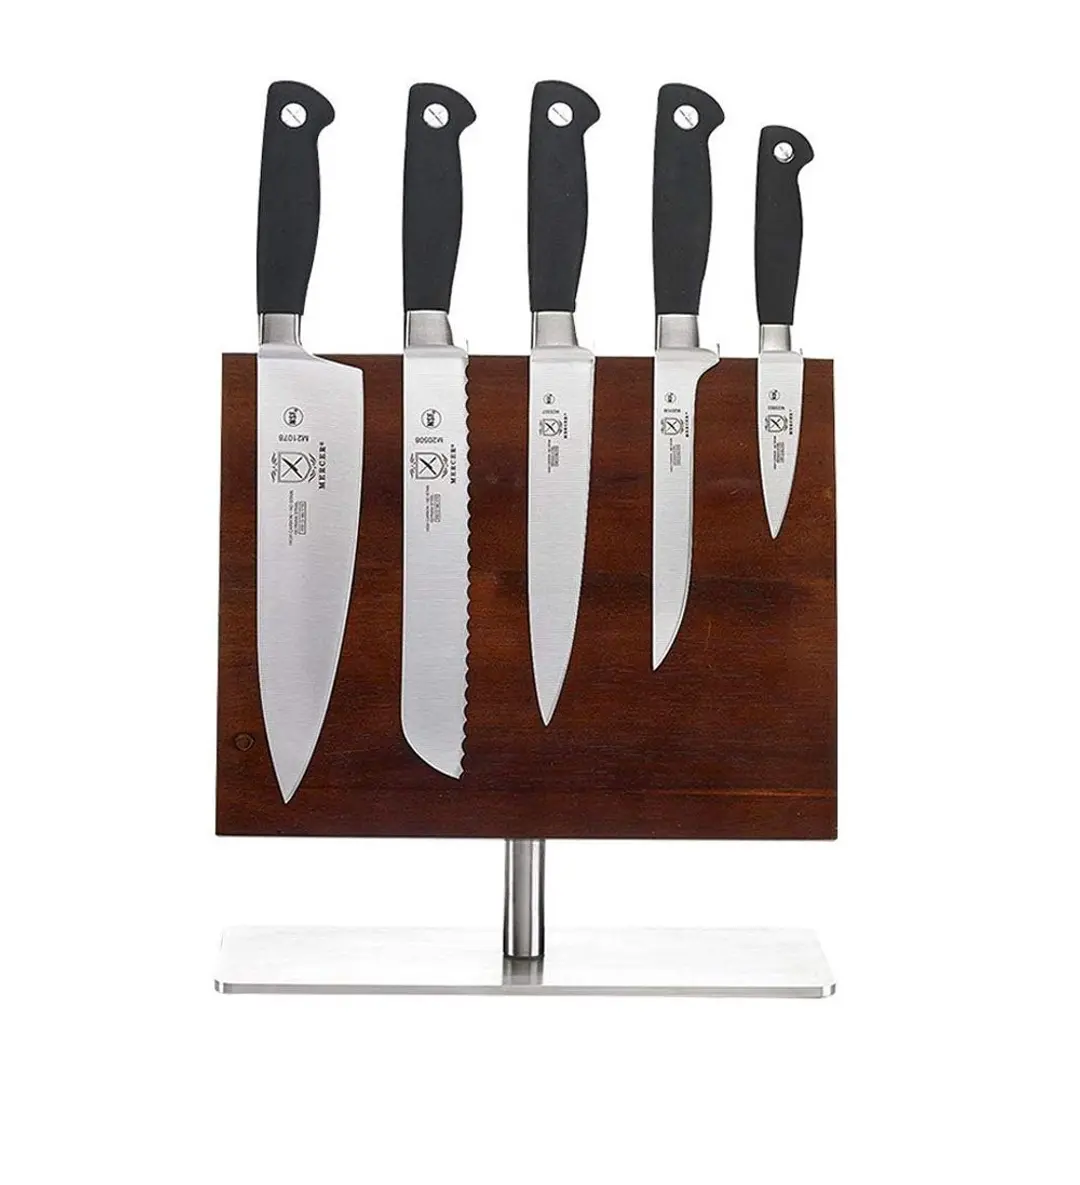 Mercer Culinary Magnetic Knife Set review